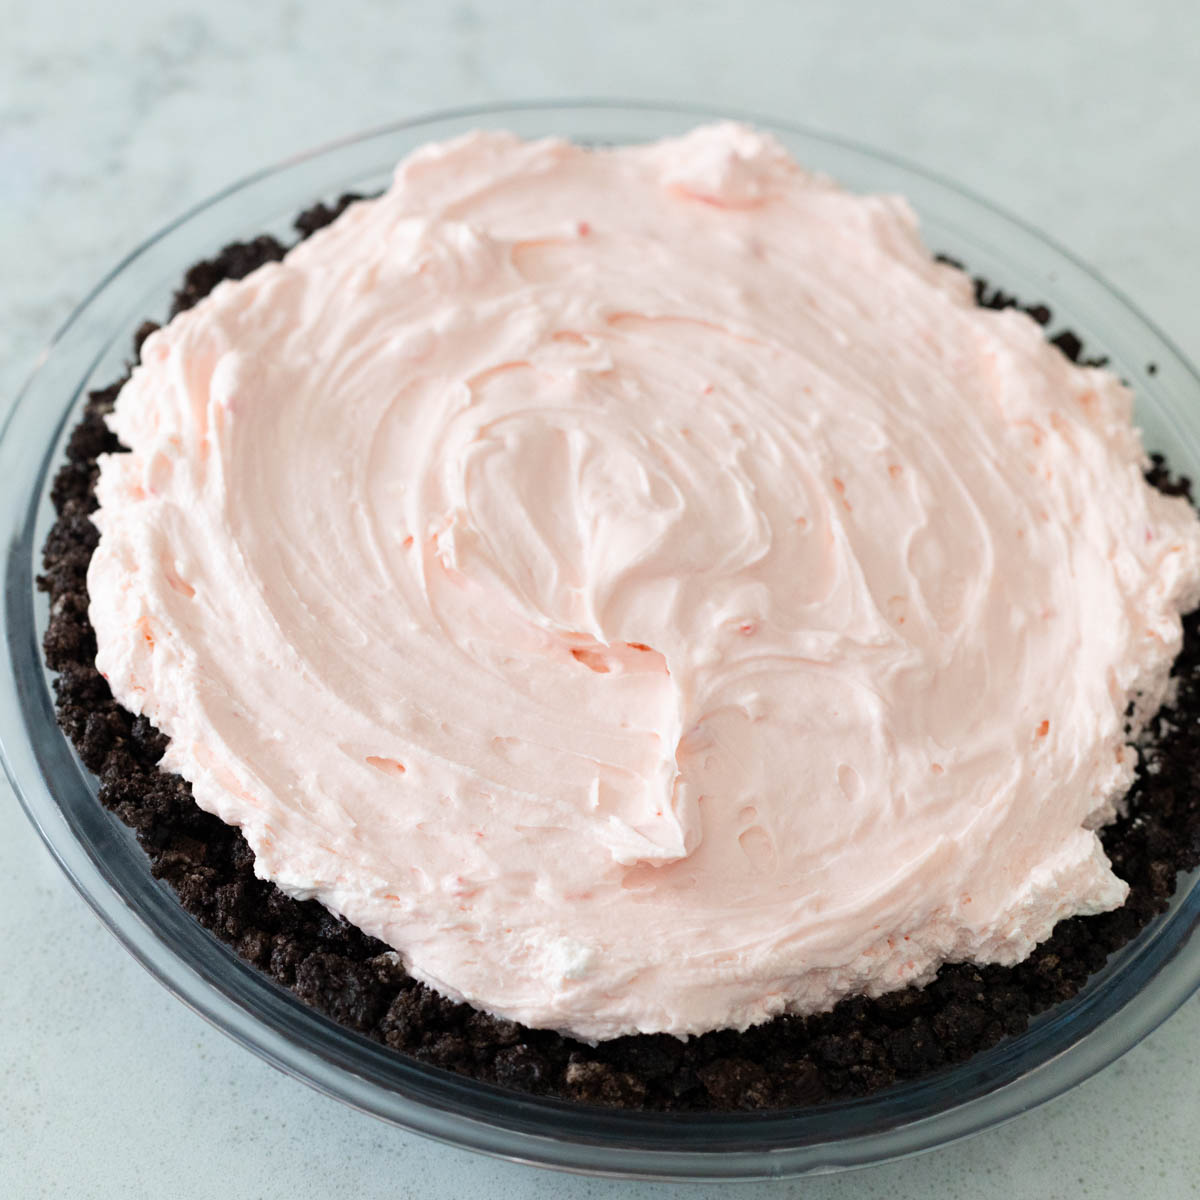 The light pink, fluffy peppermint pie filling has been smoothed into the prepared chocolate Oreo cookie crust.